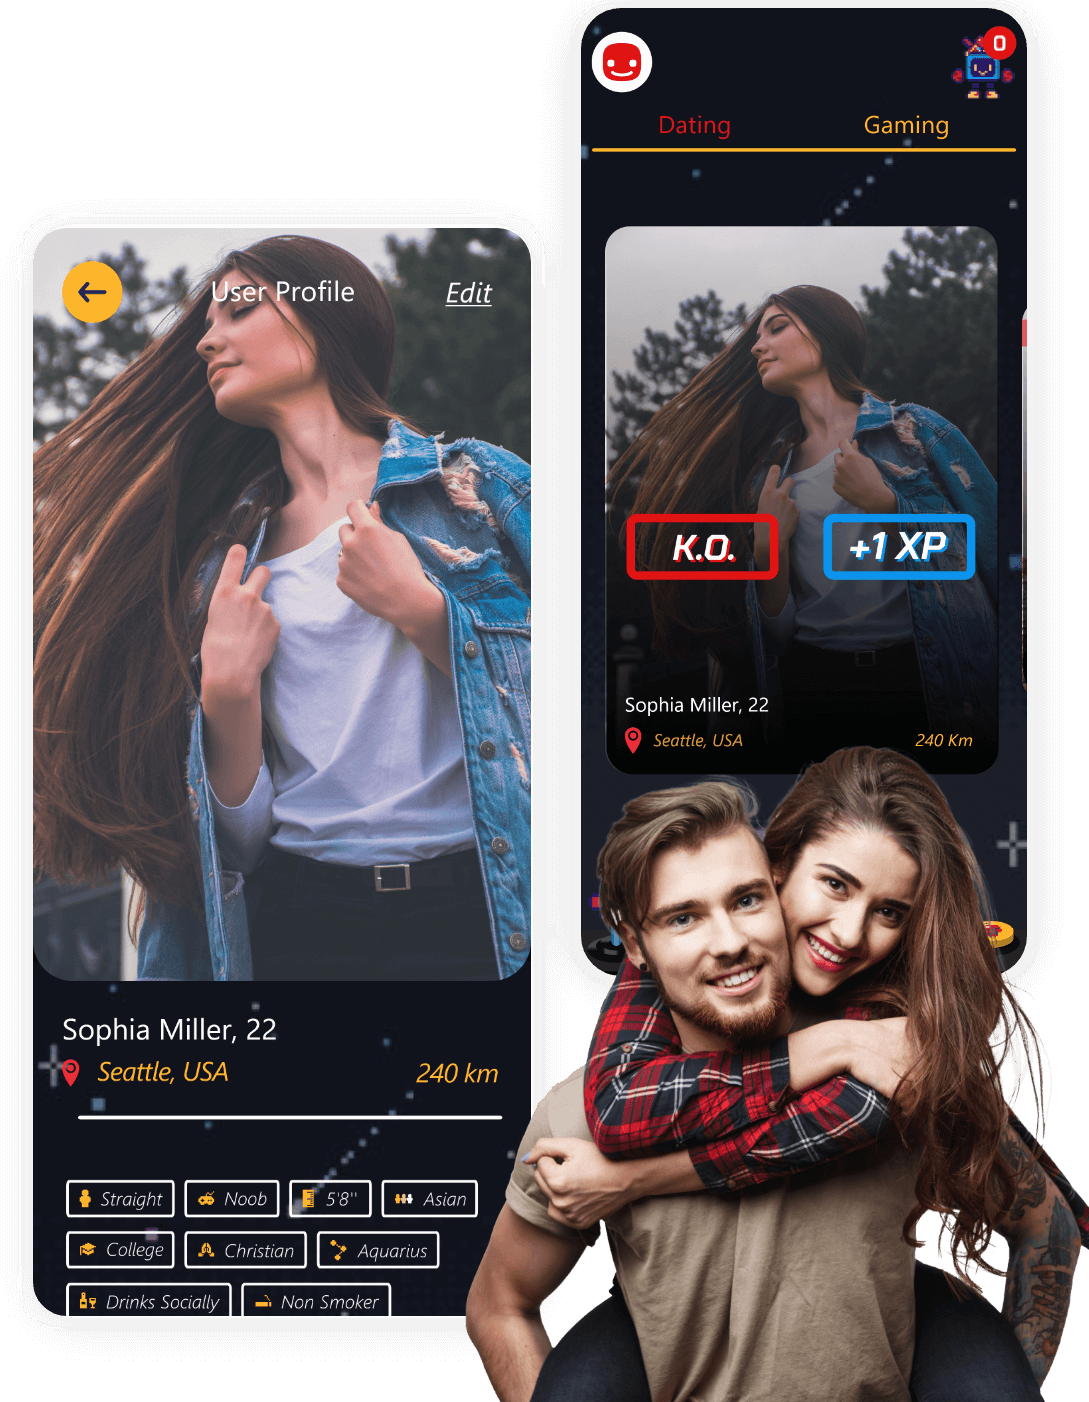 dating-and-gaming-app